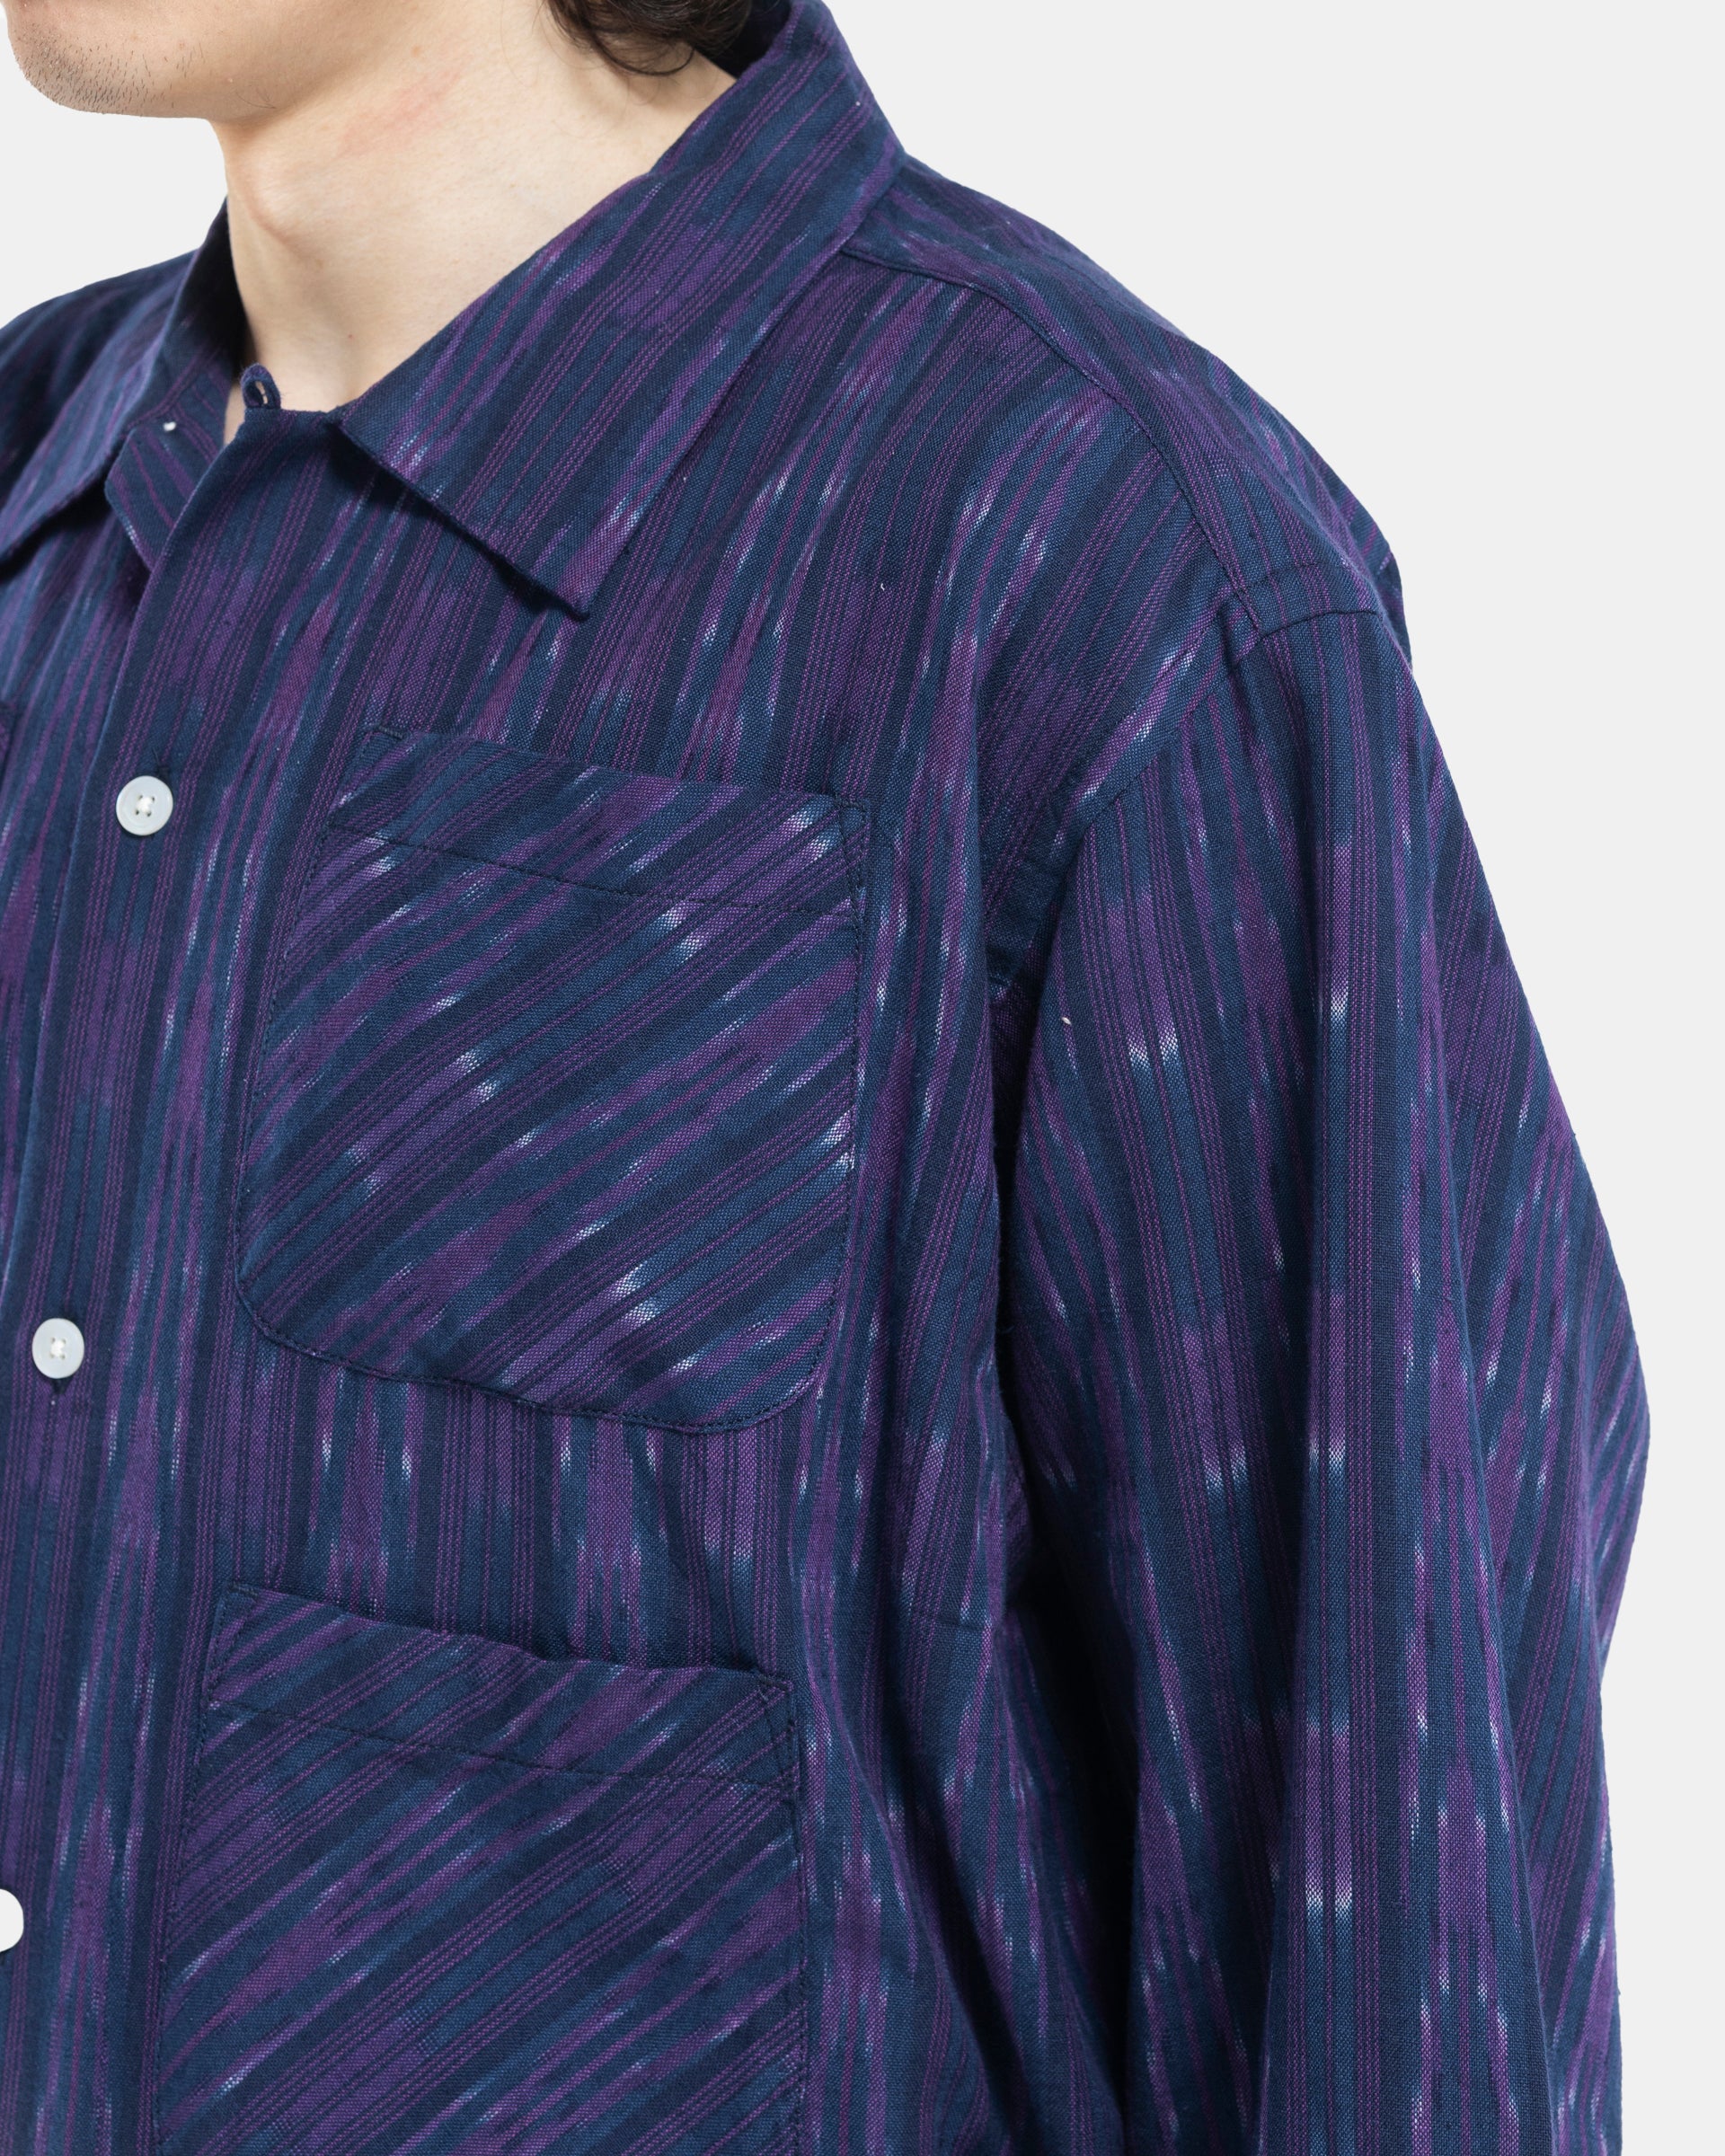 6 Pocket Shirt in Navy and Purple